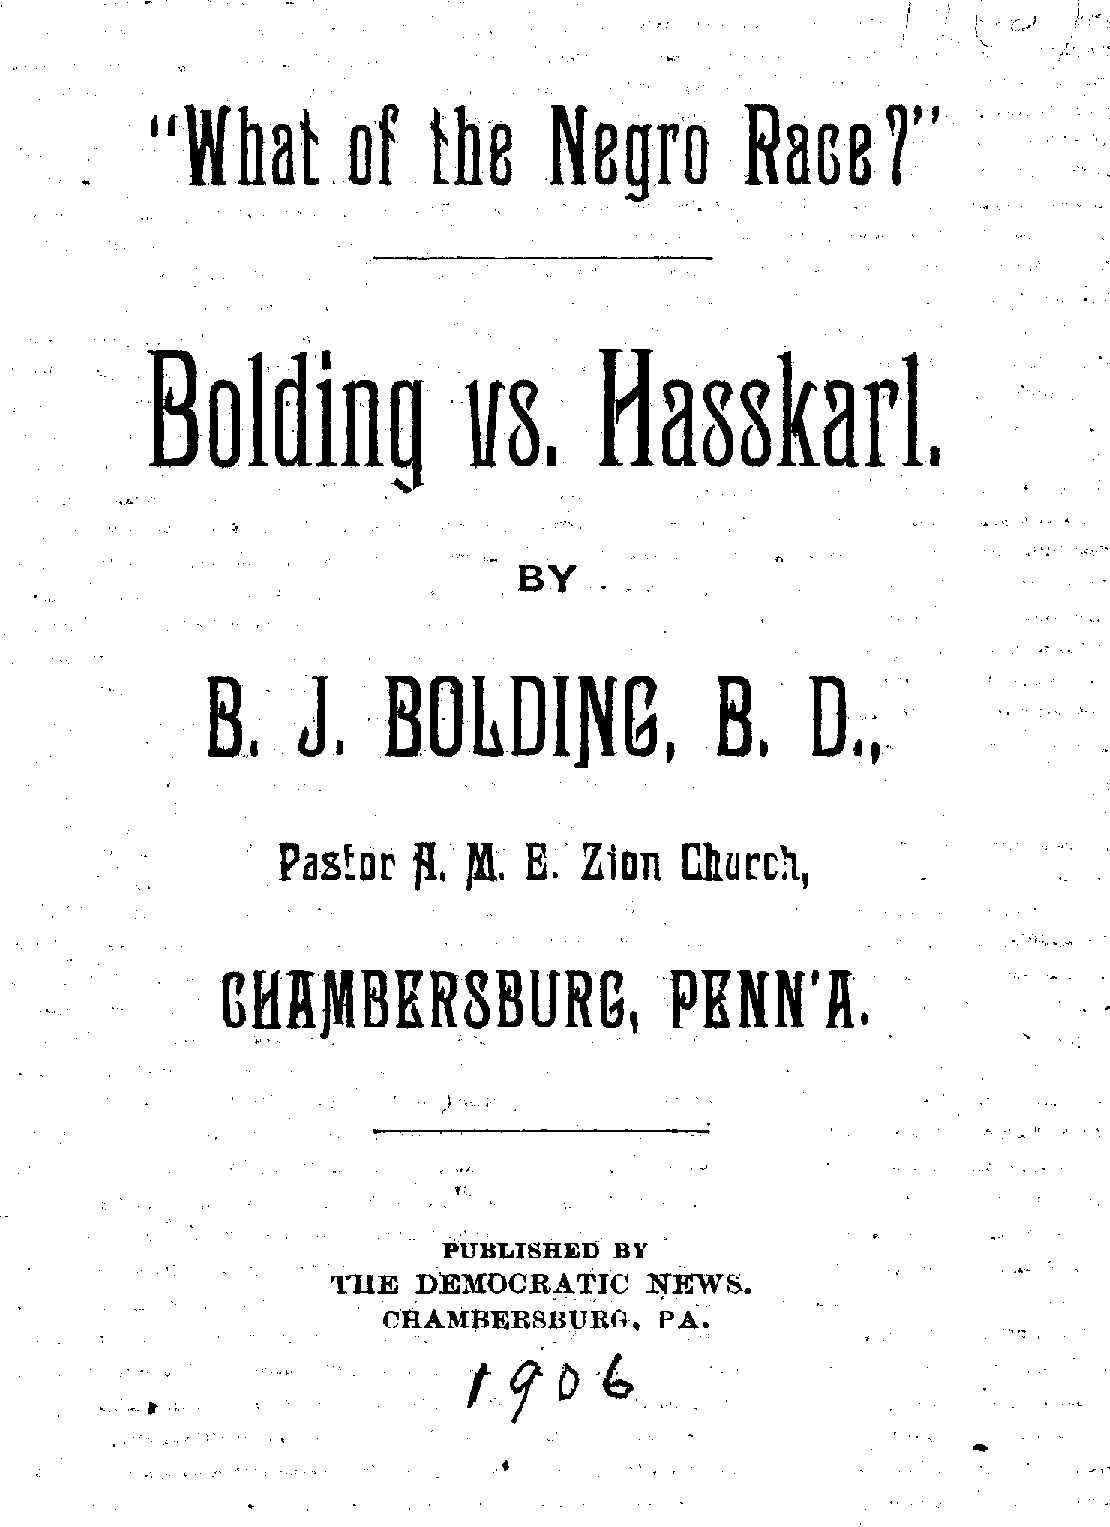 Pamphlet that reprinted essays